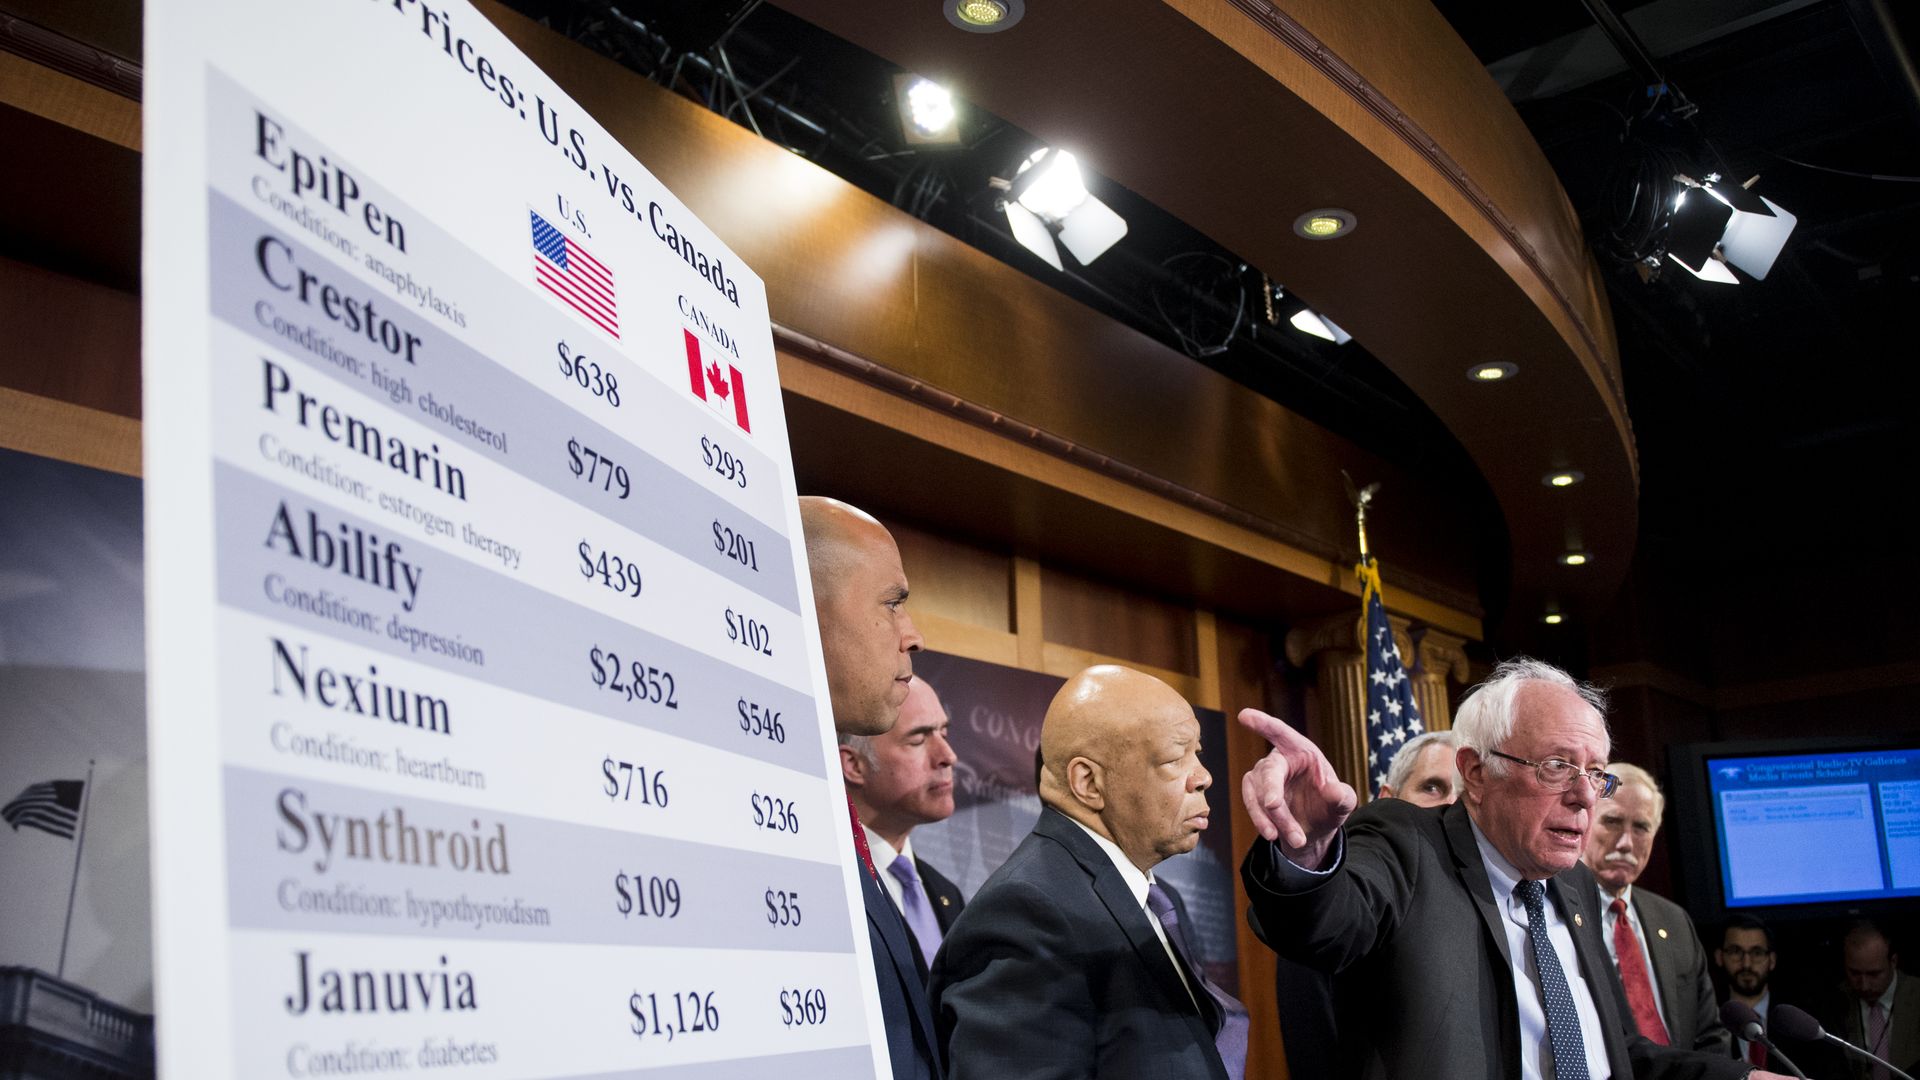 Senators point to a chart showing high drug prices.